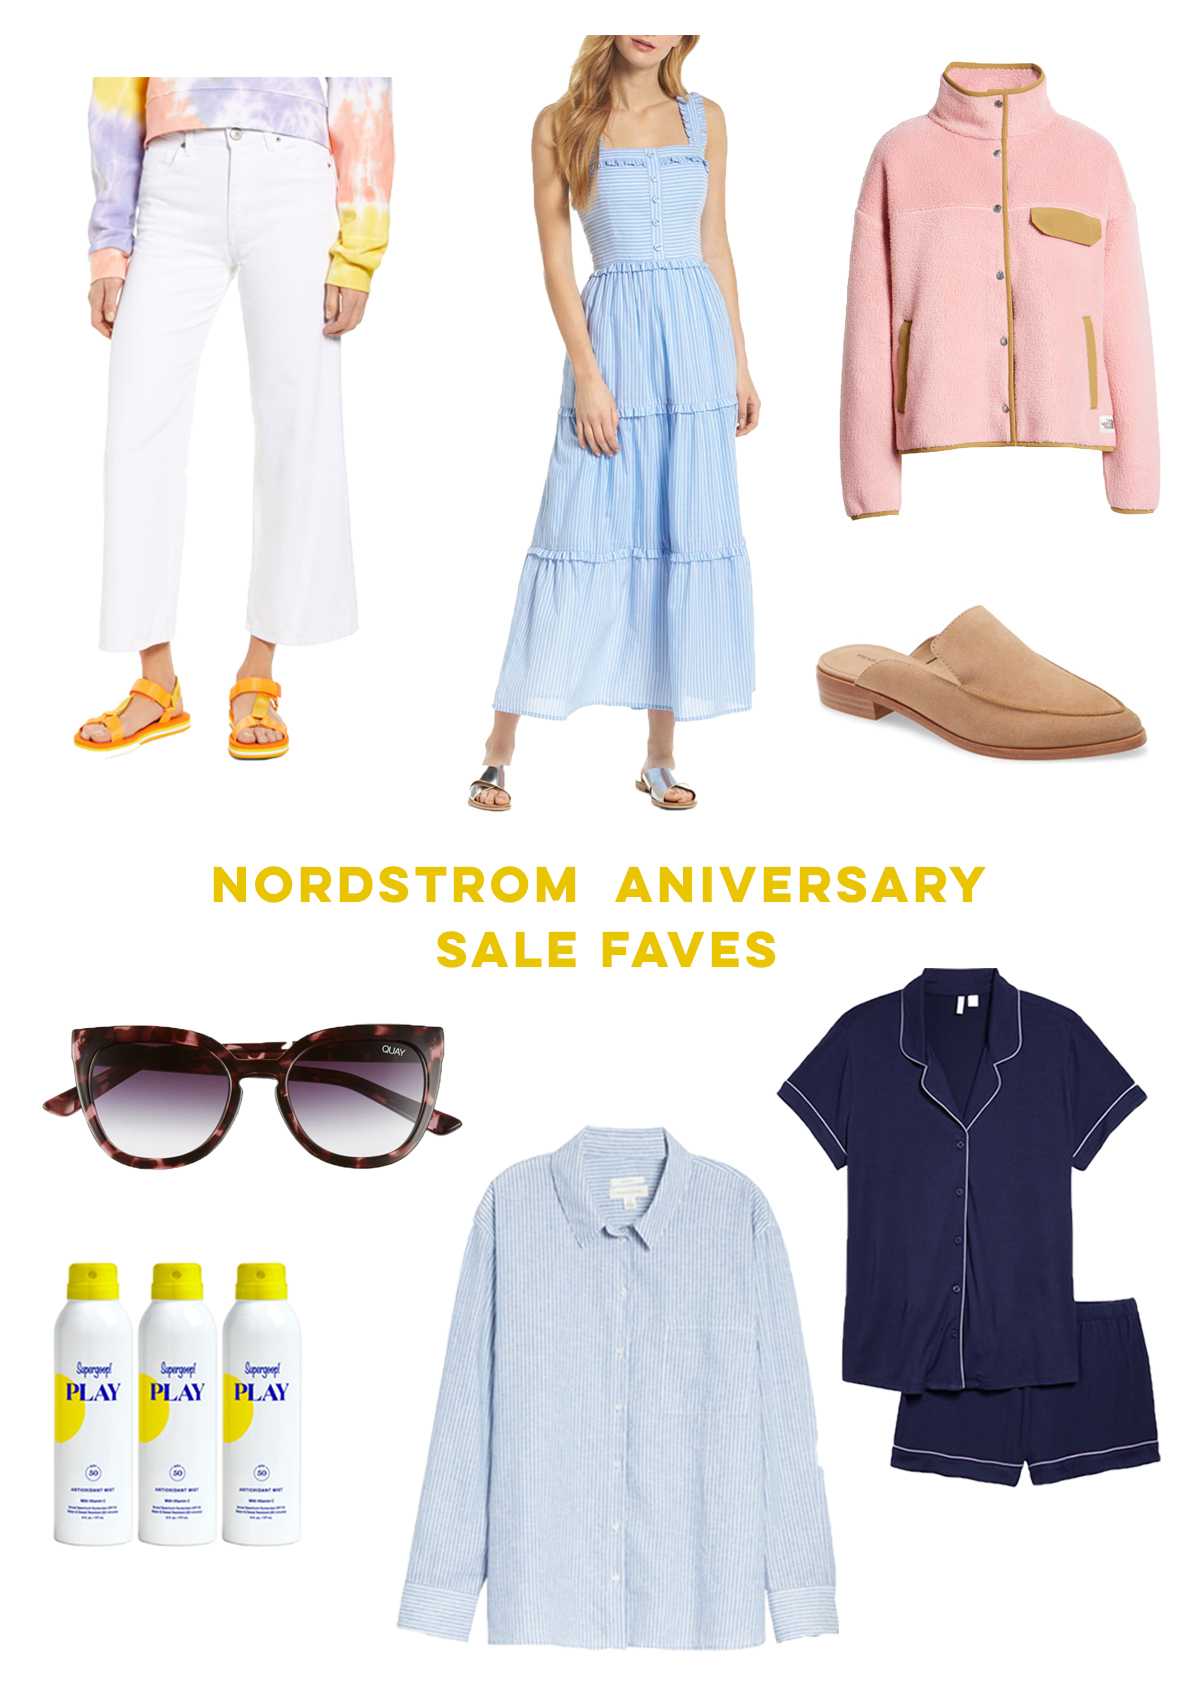 Nordstrom Anniversary Sale Favorites 2020 / Matching Pajama Set / Gal Meets Glam Dress / Backless Loafer / Tortoise Sunglasses / Supergoop Sunscreen - Sunshine Style, A Classic Fashion and Coastal Lifestyle Blog by Katie